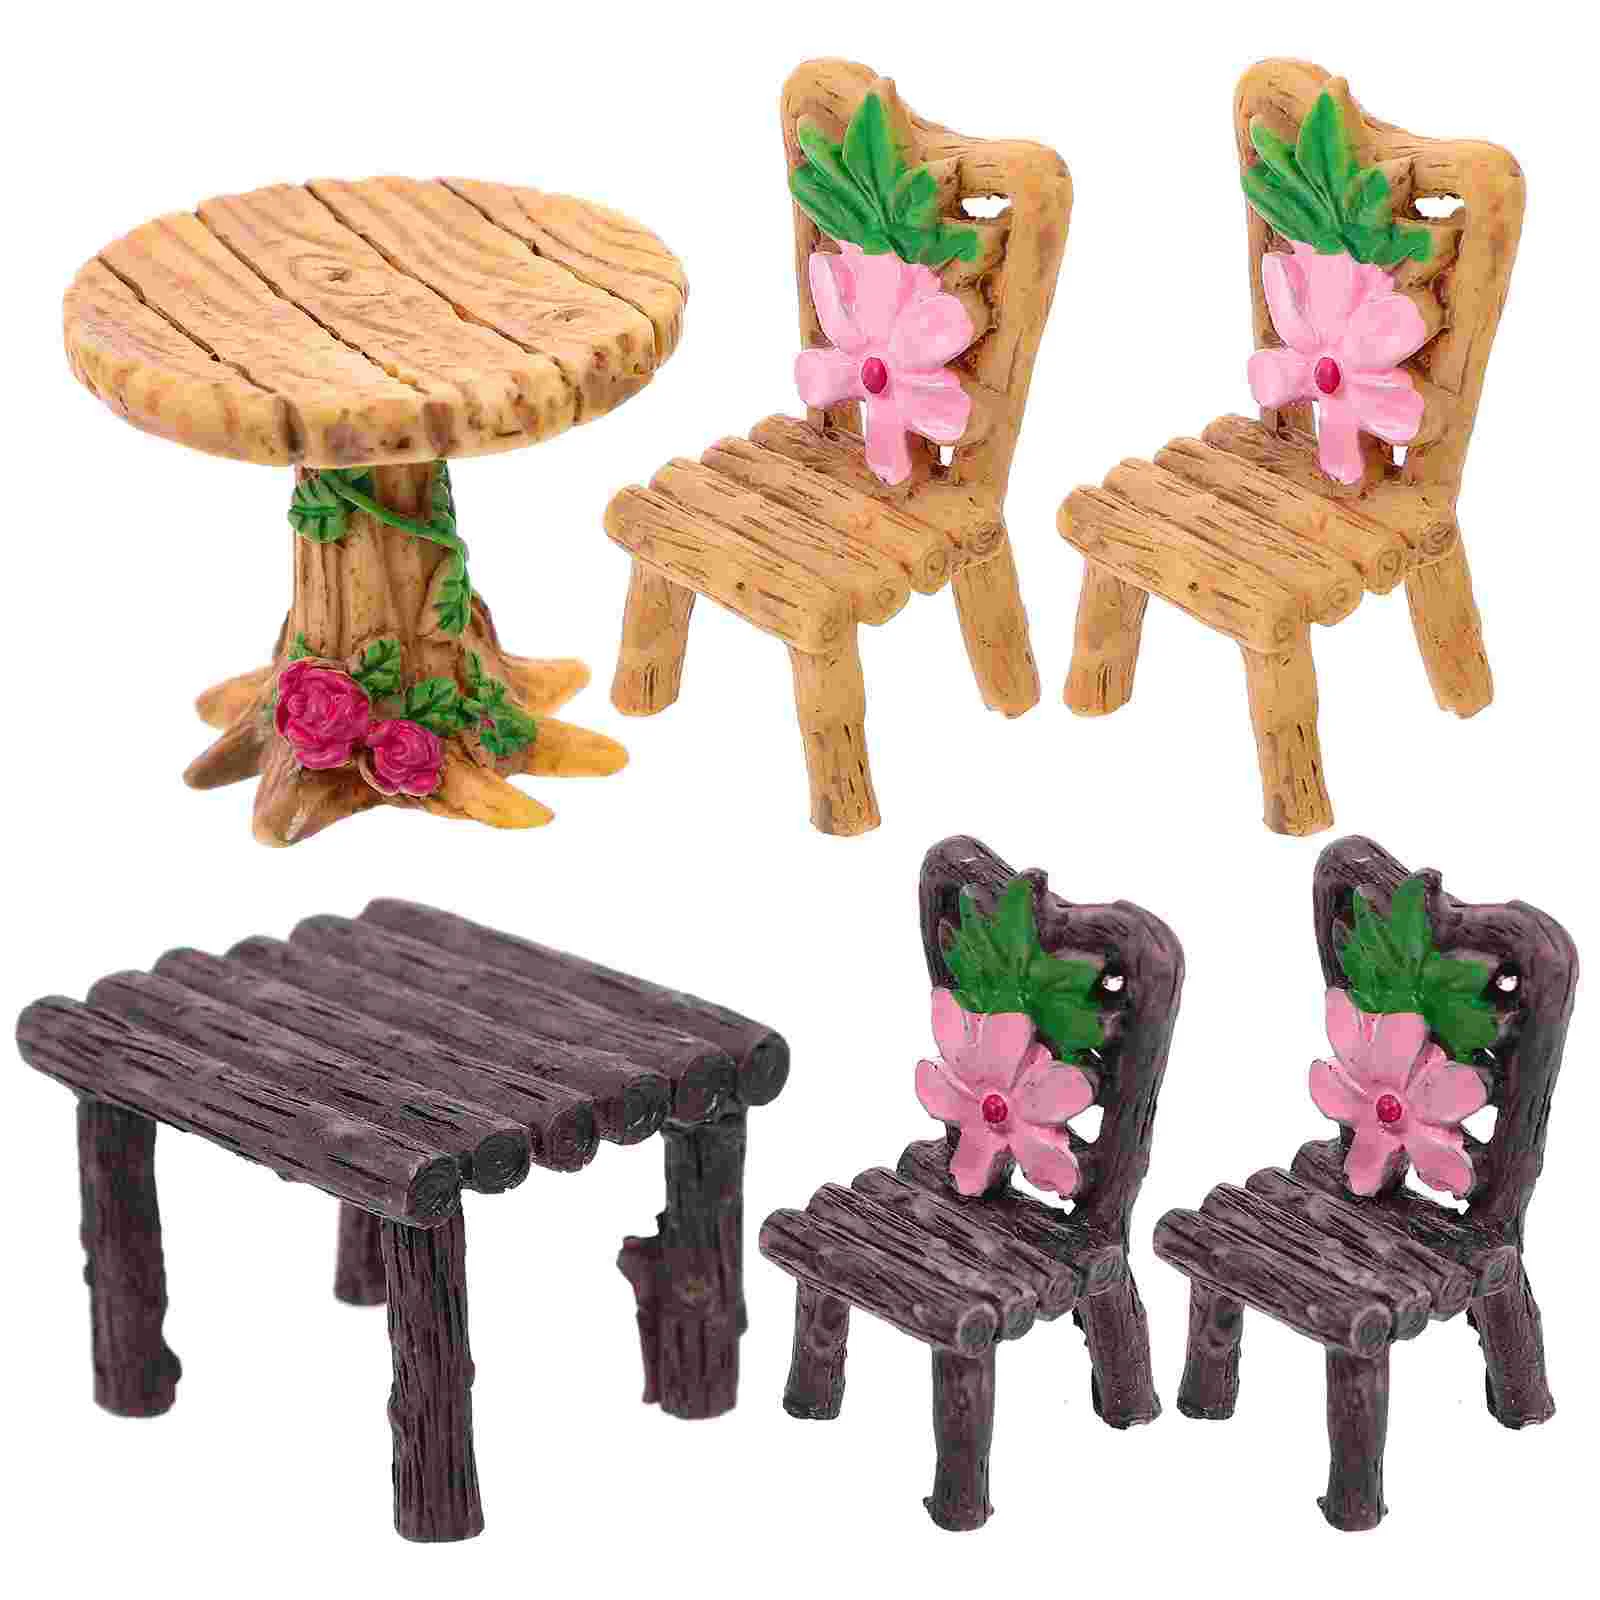 

6 Pcs Resin Table and Chair Ornaments DIY Miniature Furniture Adornment Kids Chairs House Supplies Decor